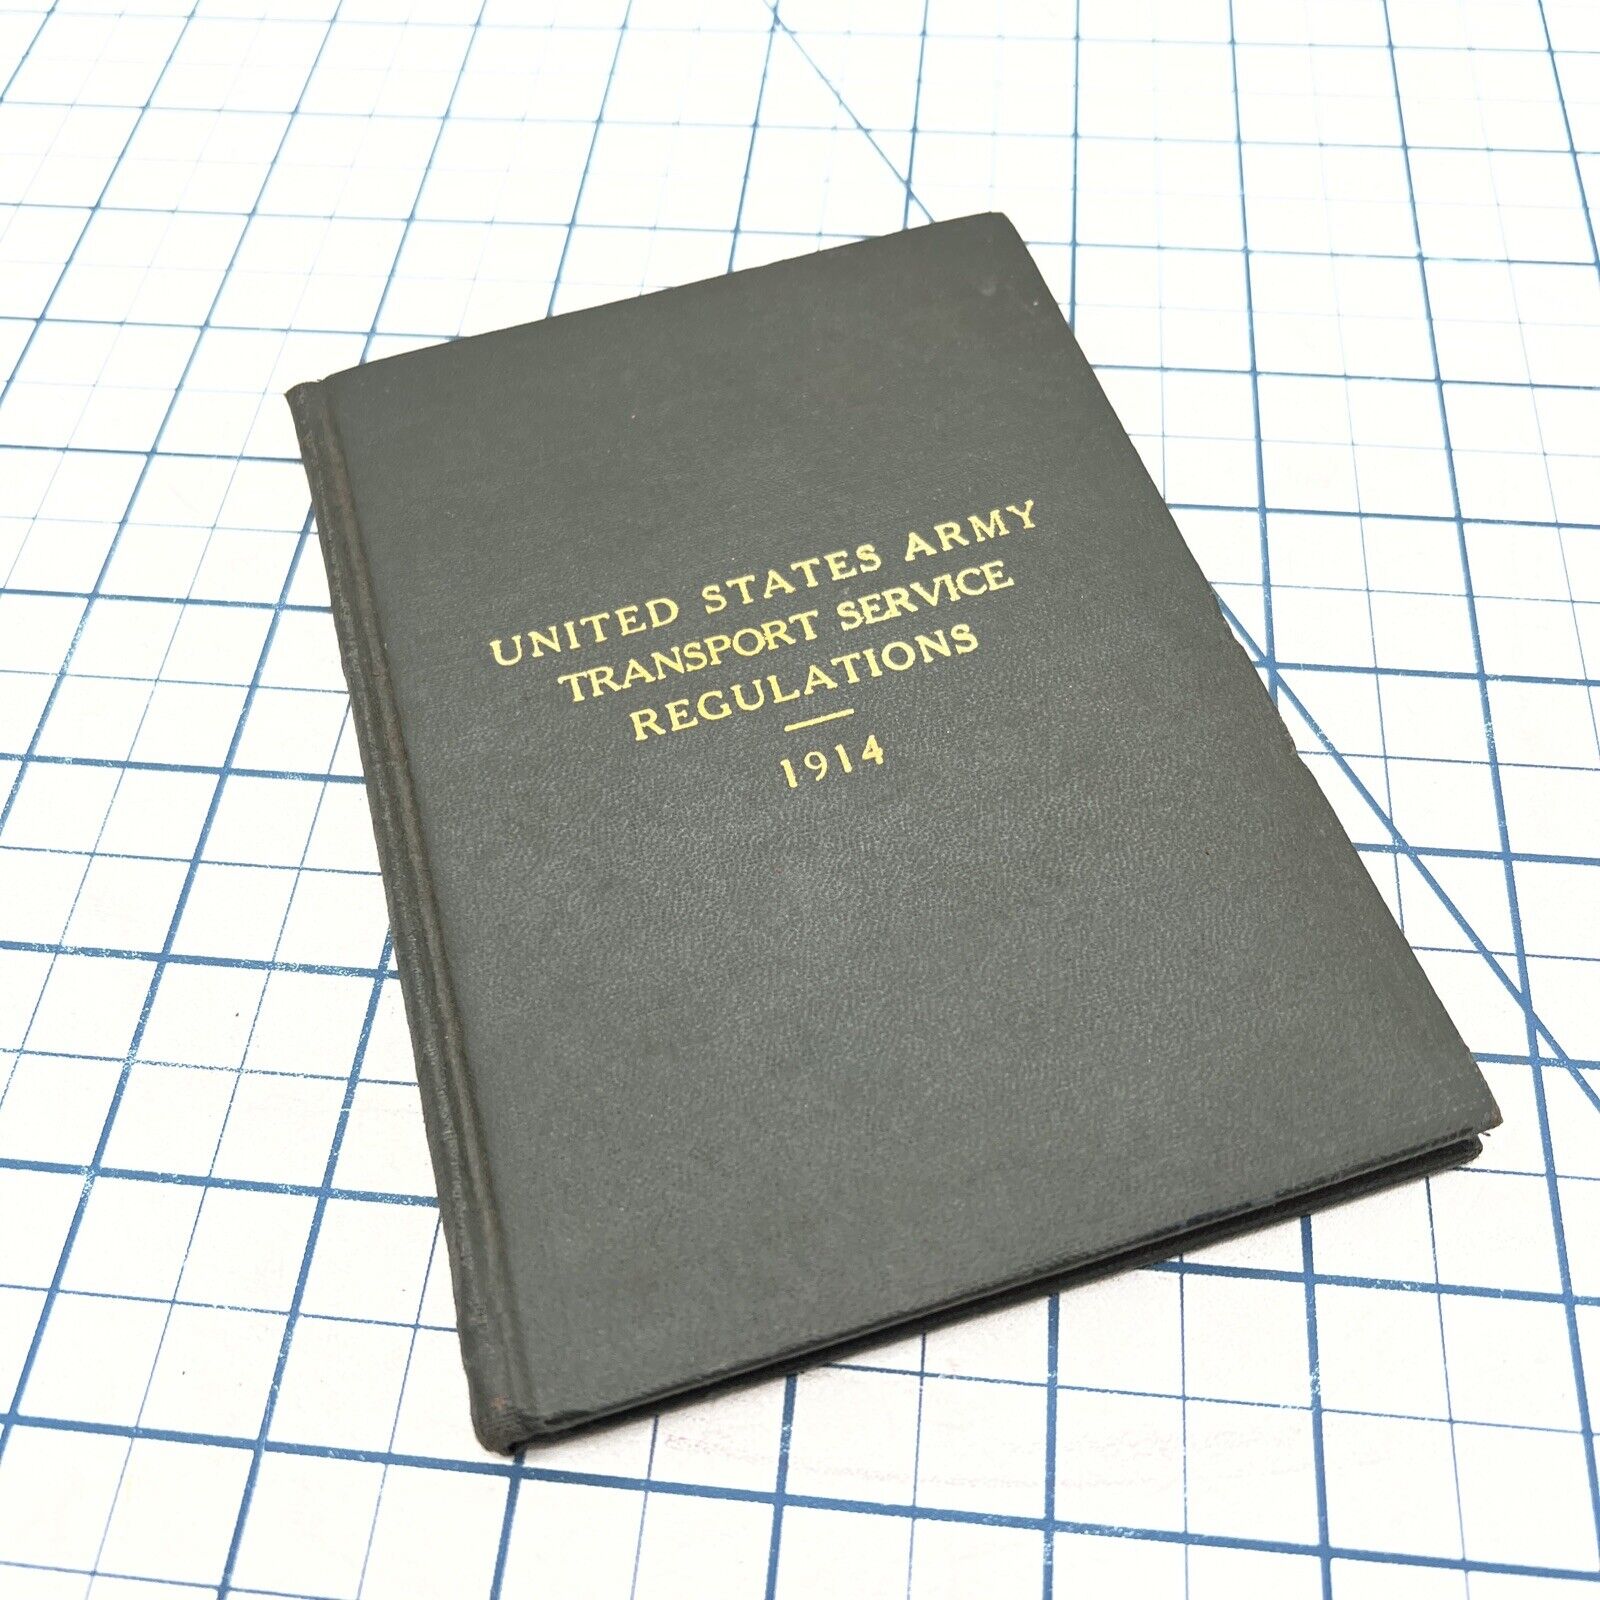 1914 UNITED STATES ARMY TRANSPORT SERVICE REGULATIONS BOOK WWI DOCUMENT 465